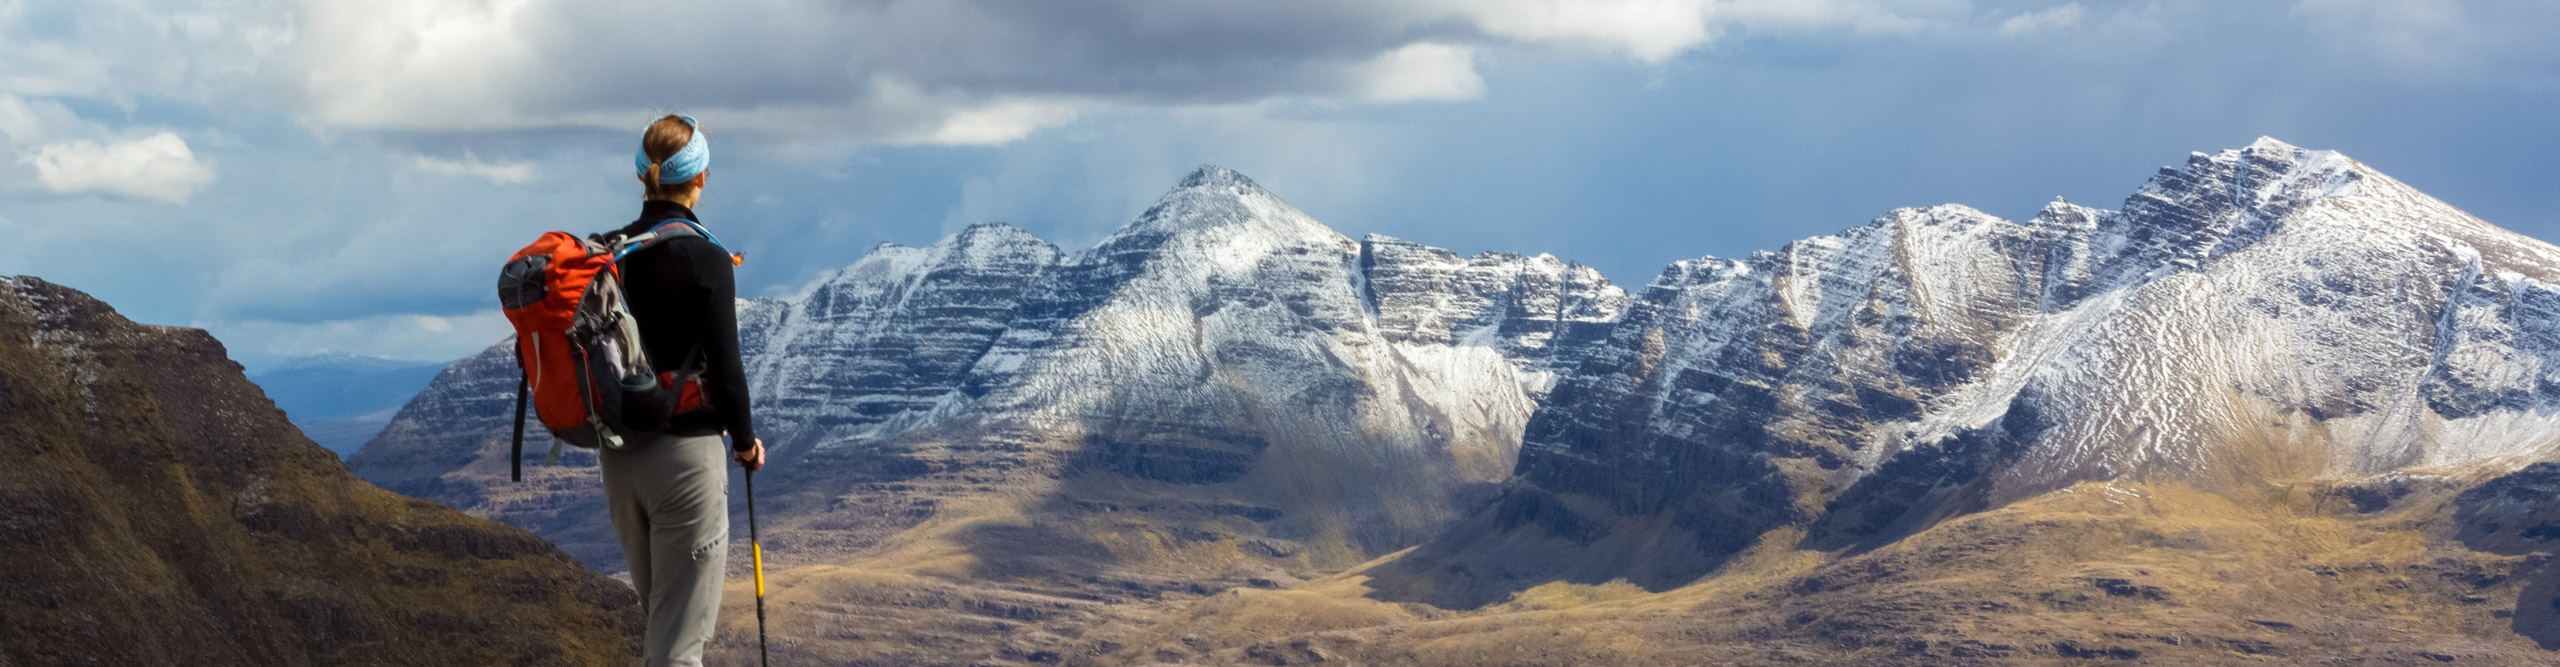 Looking out across Liathach as bad weather approaches. Torridon in the Scottish Highlands in the UK.